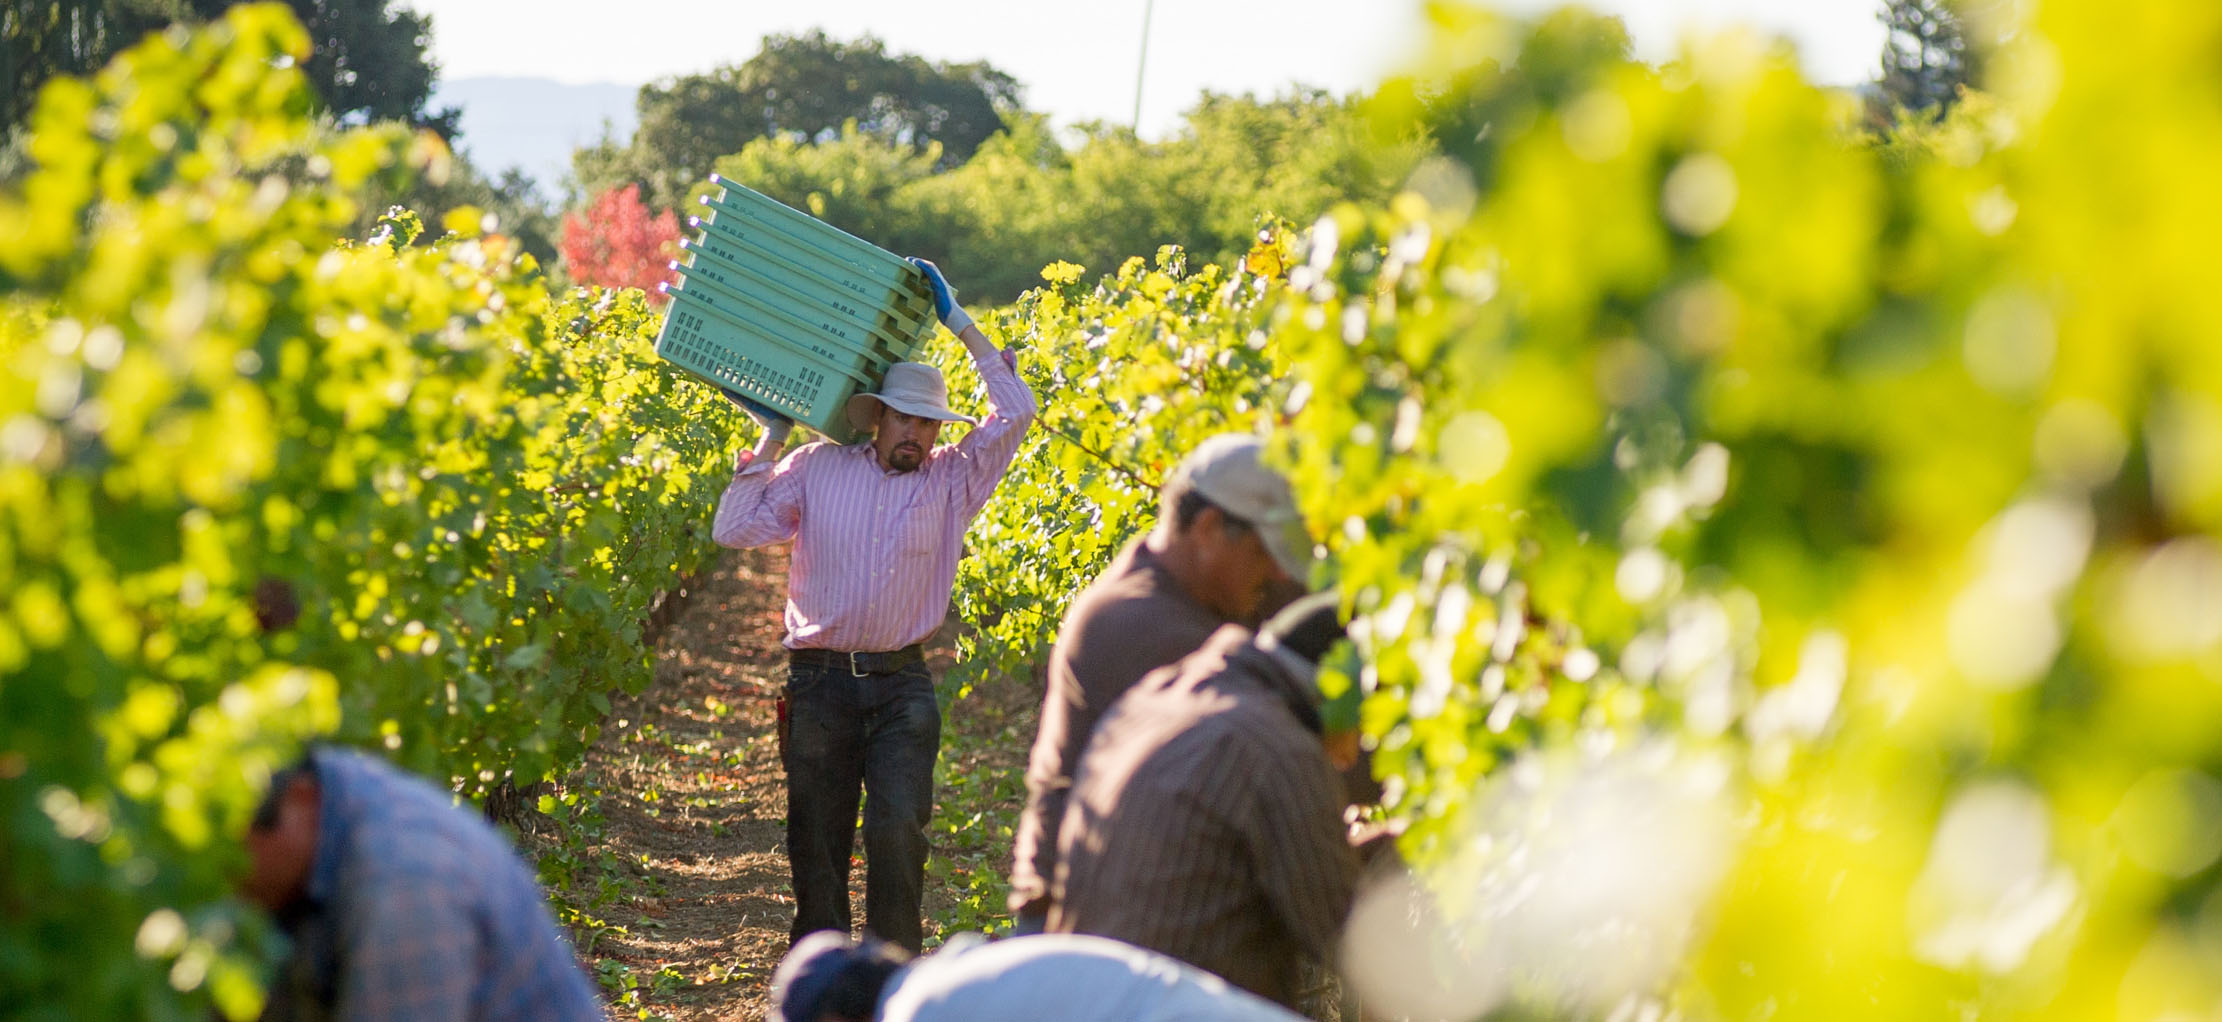 Vineyard workers picking grapes with man carrying large bin on shoulder in background.